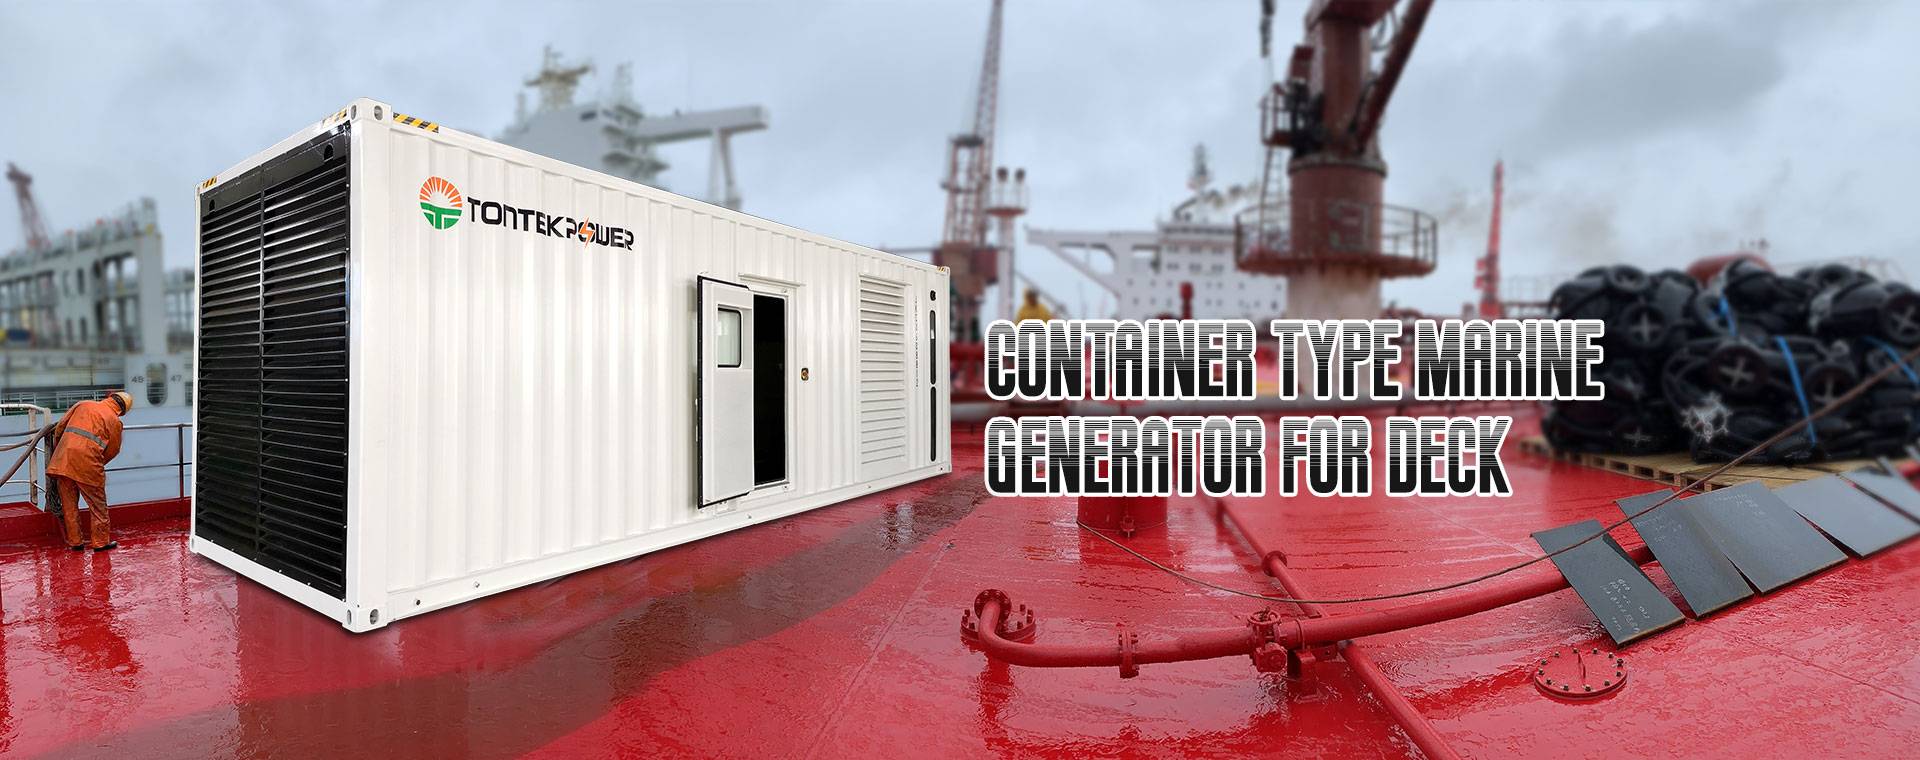 CONTAINER TYPE MARINE  GENERATOR FOR DECK